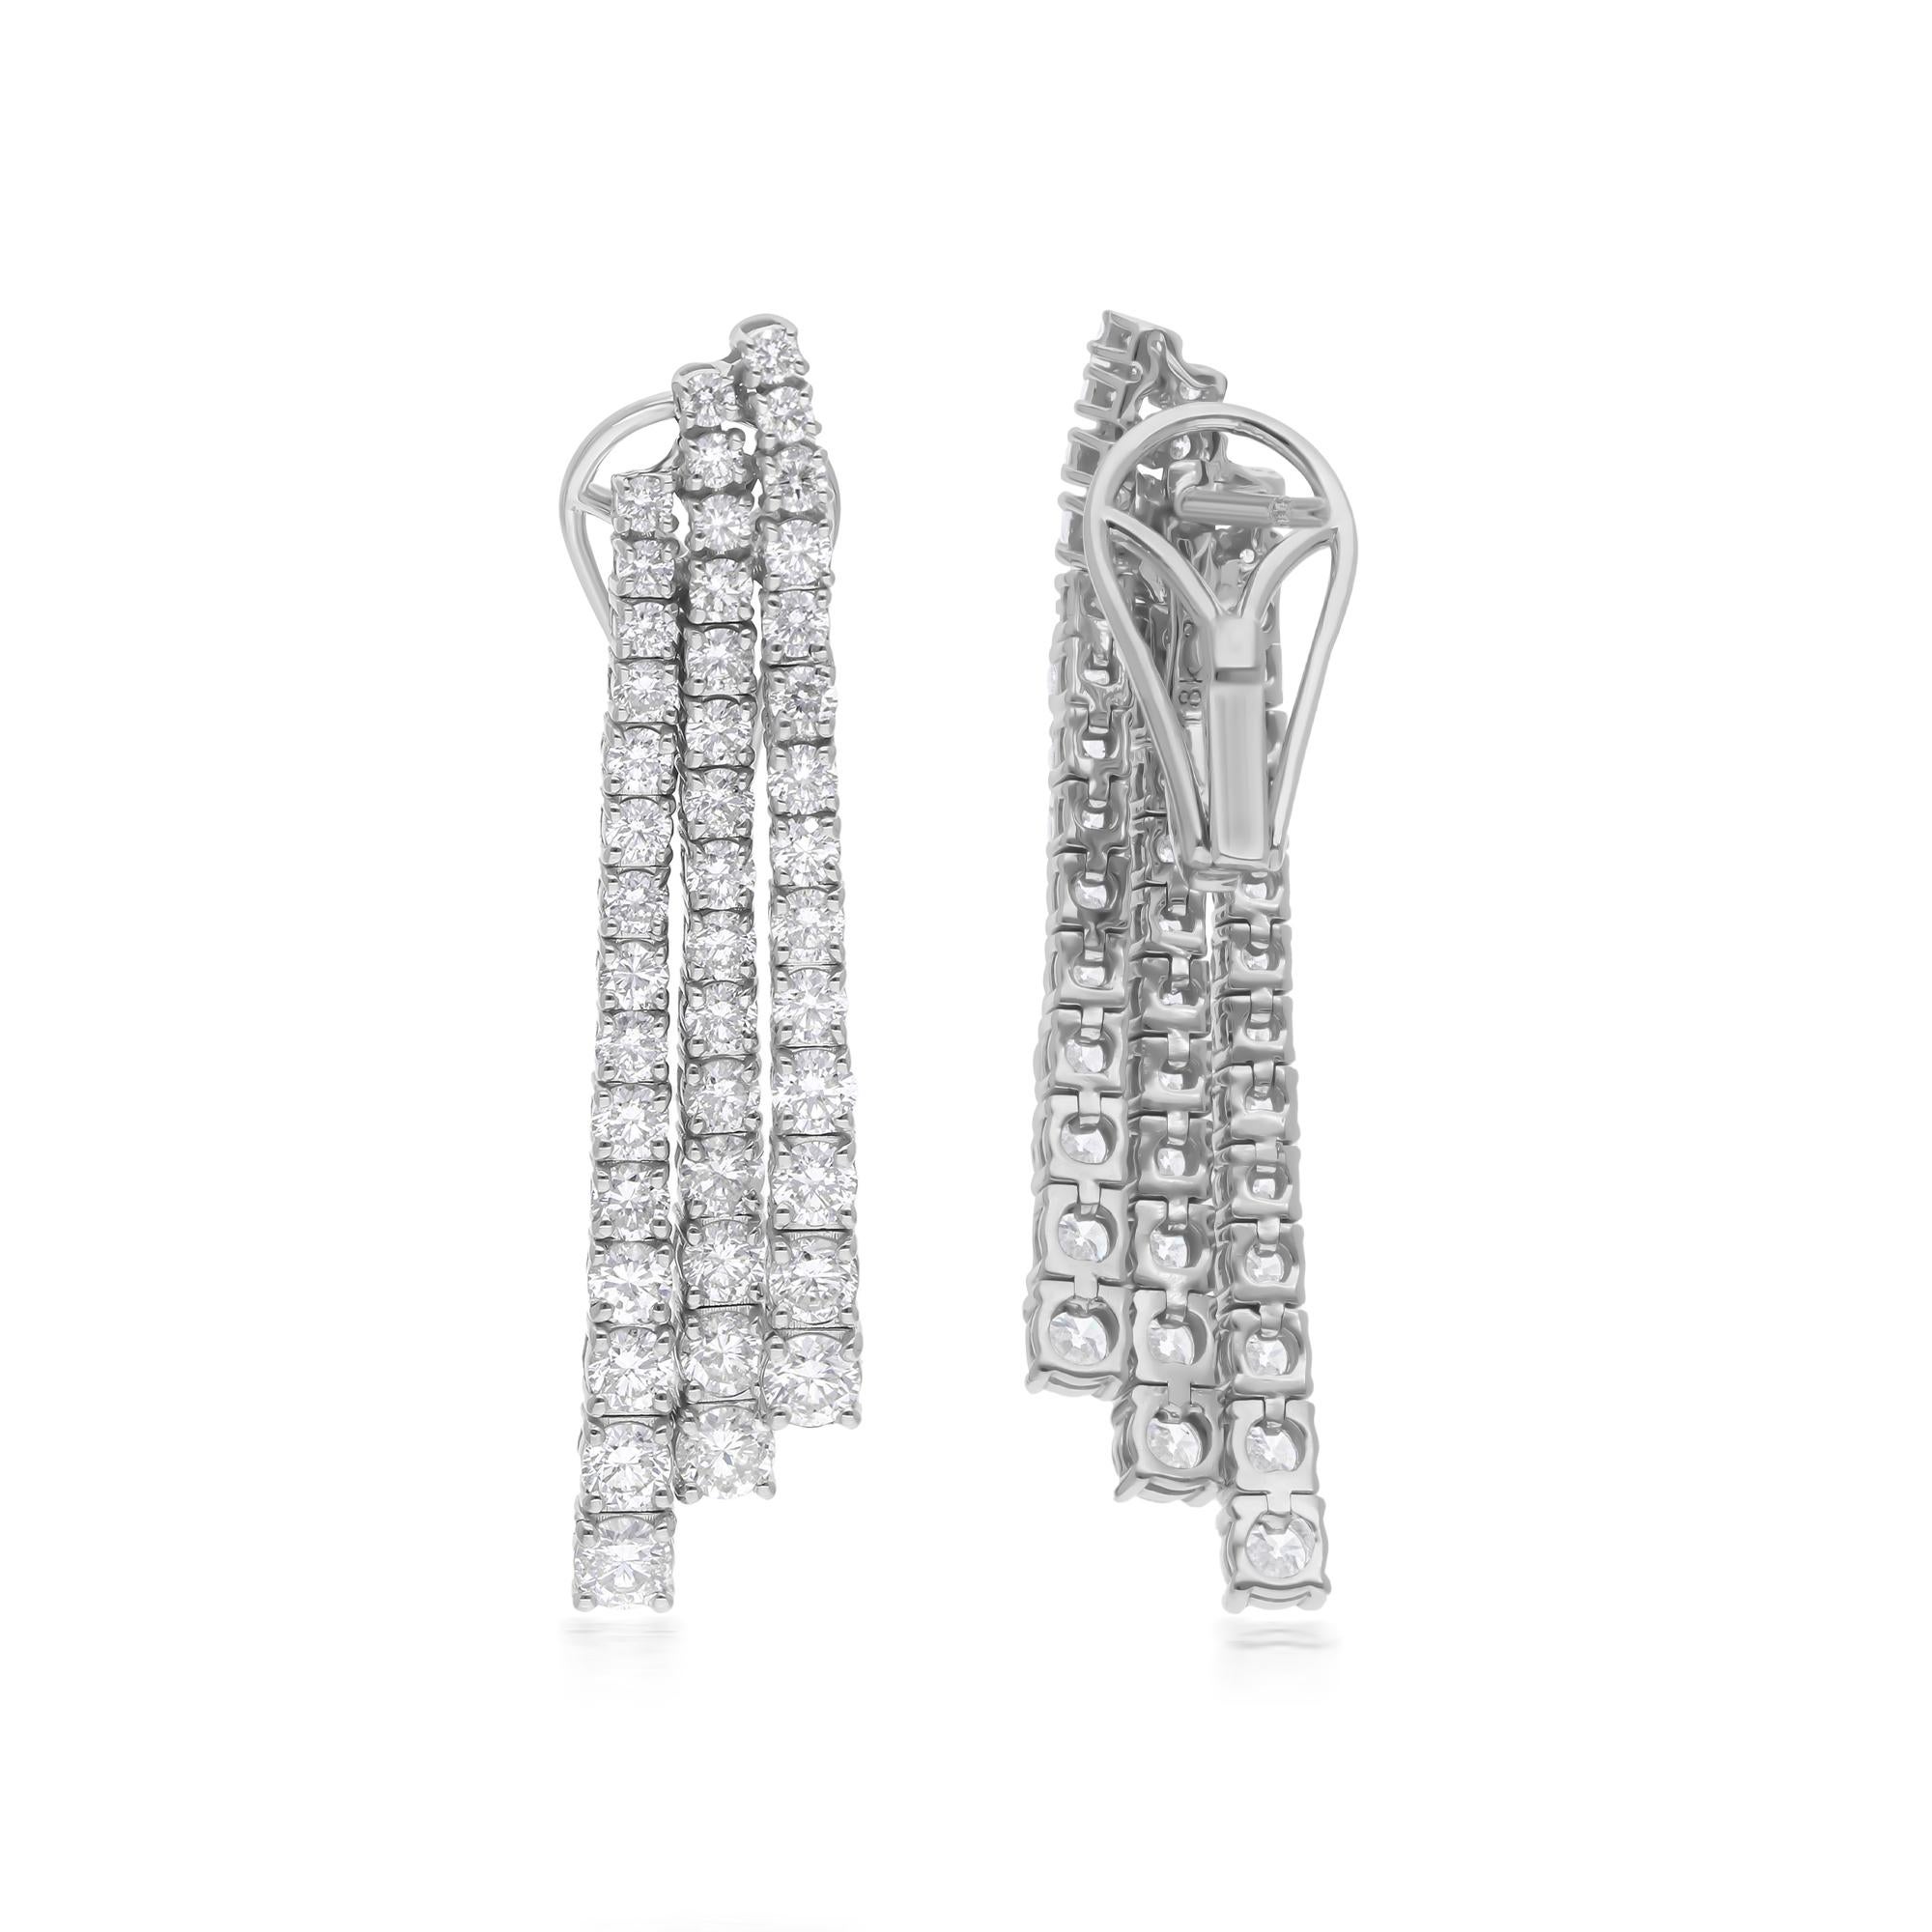 At the heart of each earring, a captivating round diamond takes center stage, radiating brilliance and fire with its impeccable cut and clarity. Surrounding it, two additional lines of smaller diamonds cascade in a mesmerizing pattern, enhancing the